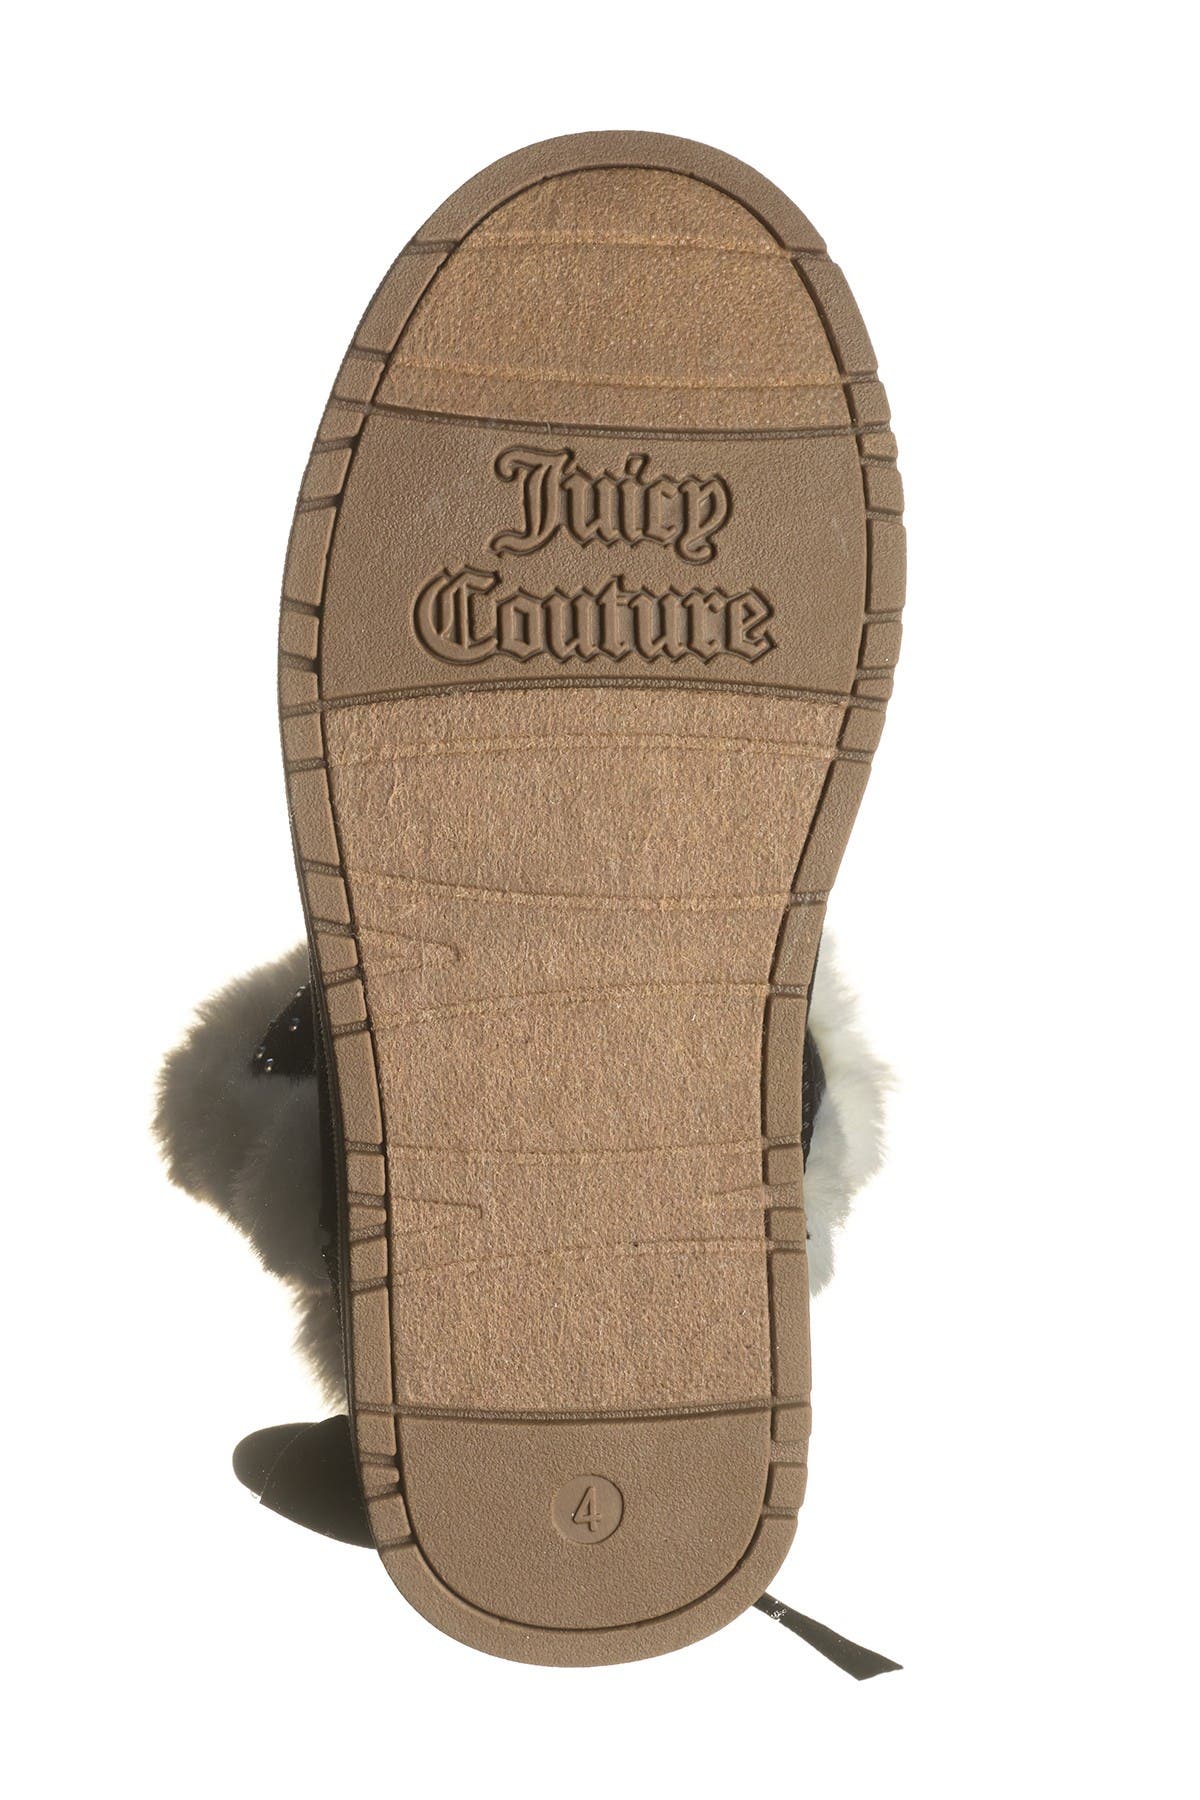 Juicy Couture | Windsor Glitter Faux 